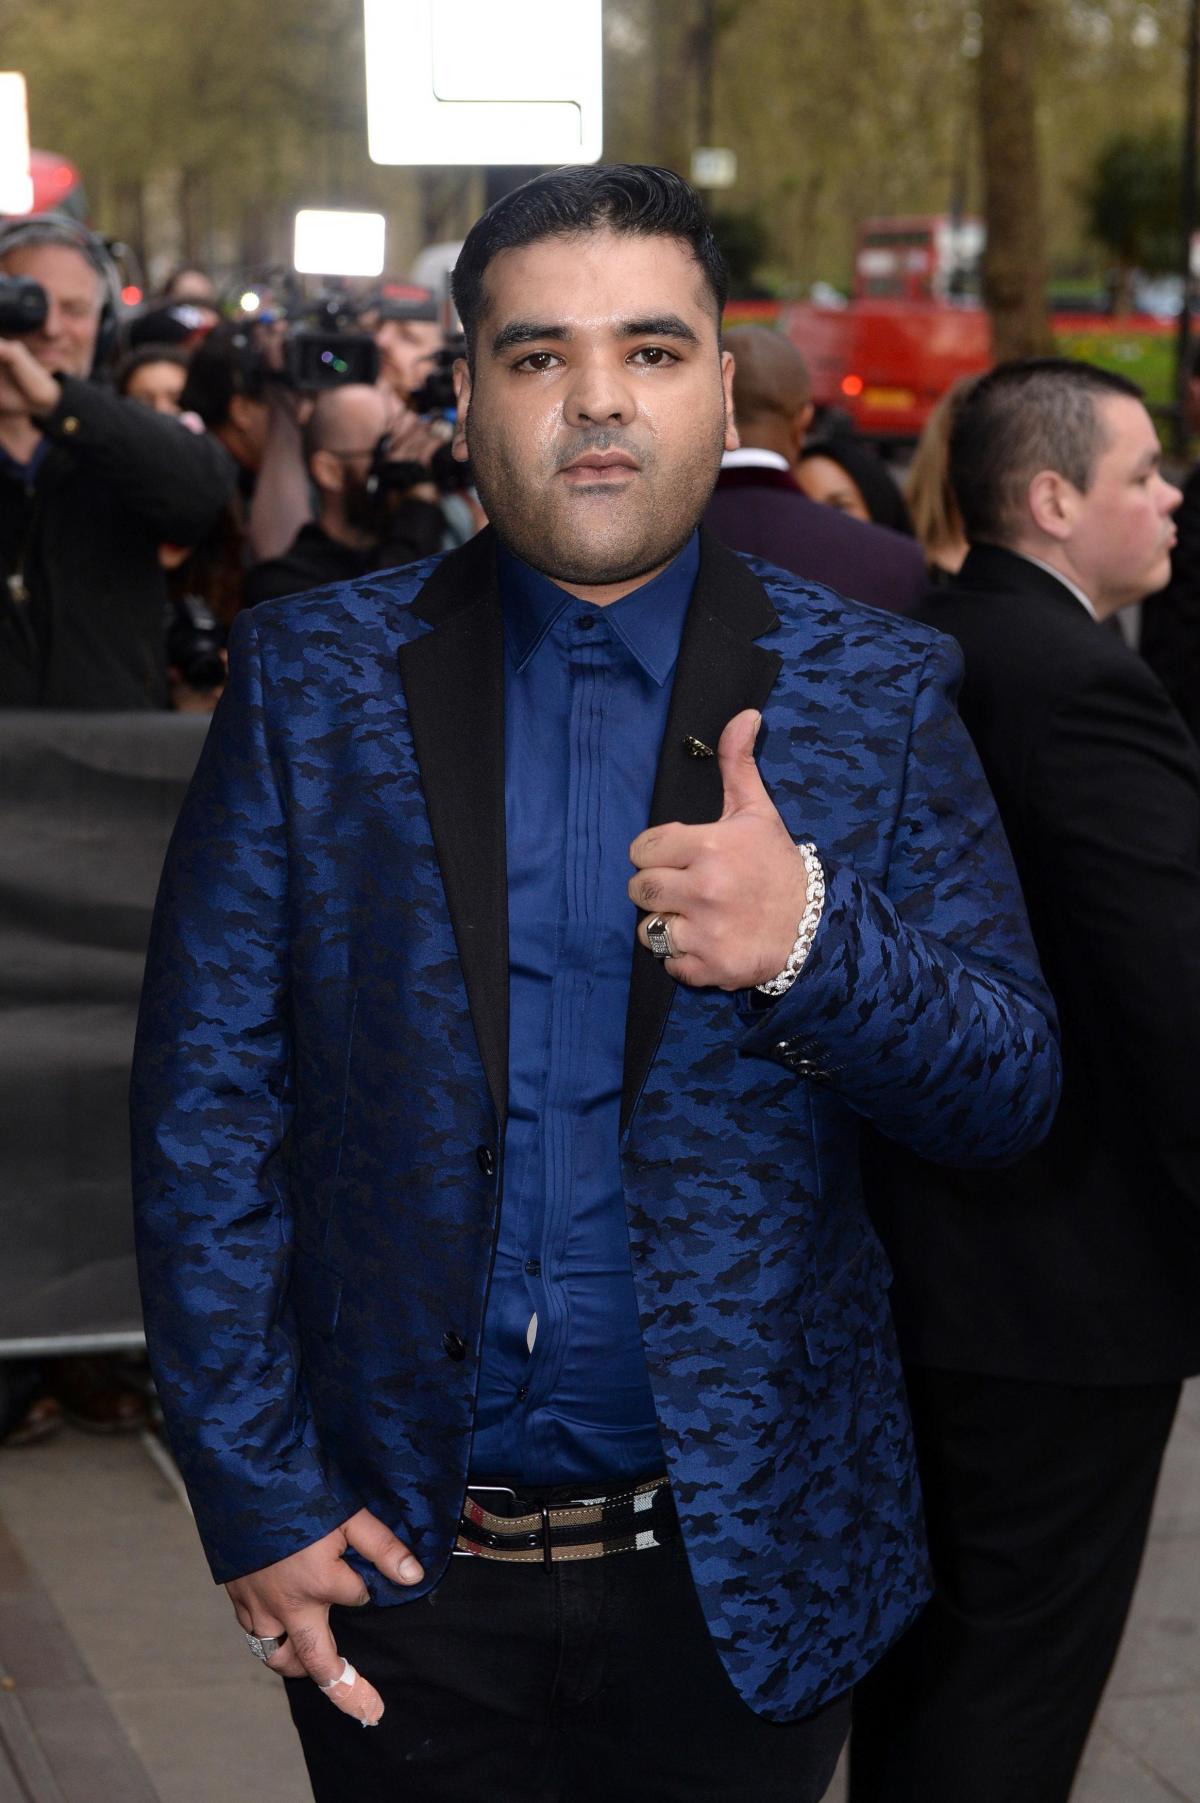 Naughty Boy attending the 2015 British Asian Awards at The Grosvenor House Hotel, London.